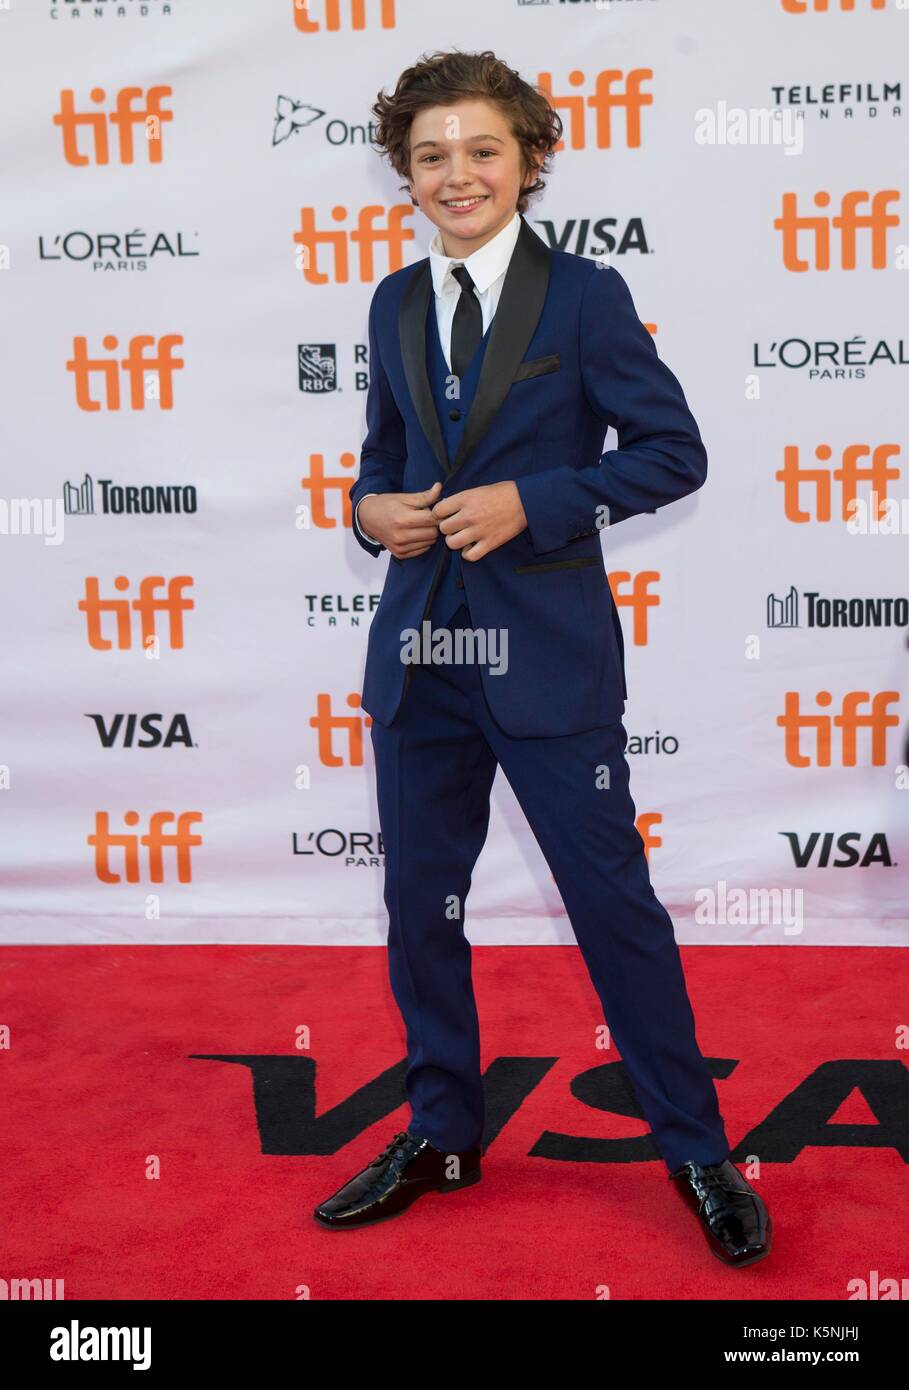 Toronto, Canada. 9th Sep, 2017. Noah Jupe attends the North American premiere of the film 'Suburbicon' at Princess of Wales Theatre during the 2017 Toronto International Film Festival in Toronto, Canada, Sept. 9, 2017. Credit: Zou Zheng/Xinhua/Alamy Live News Stock Photo